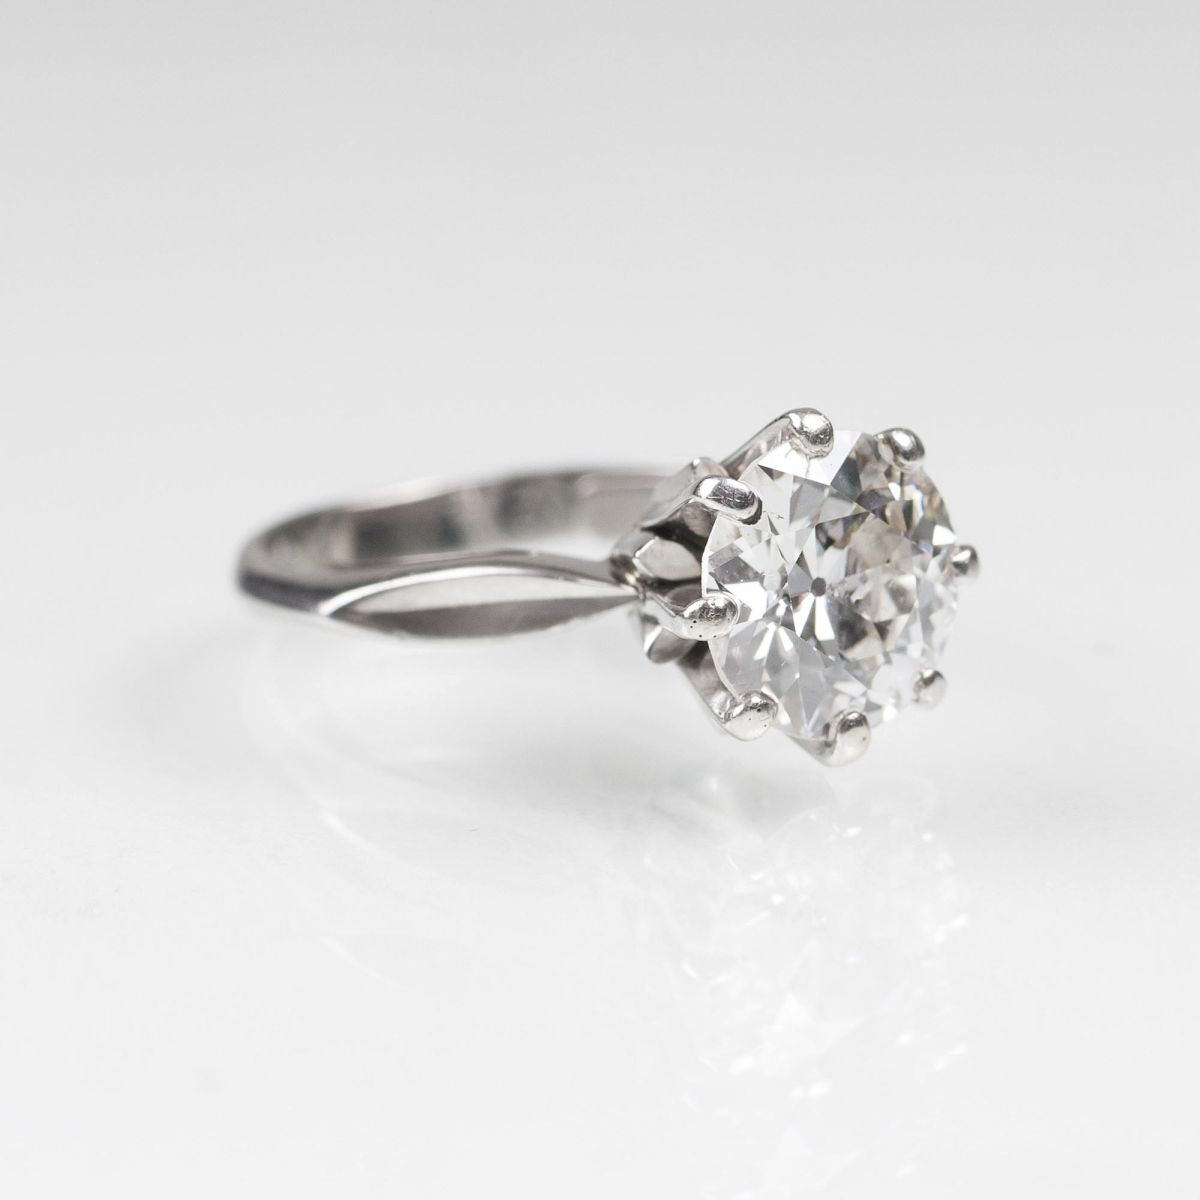 A Highcarat Diamond Solitaire Ring - image 2